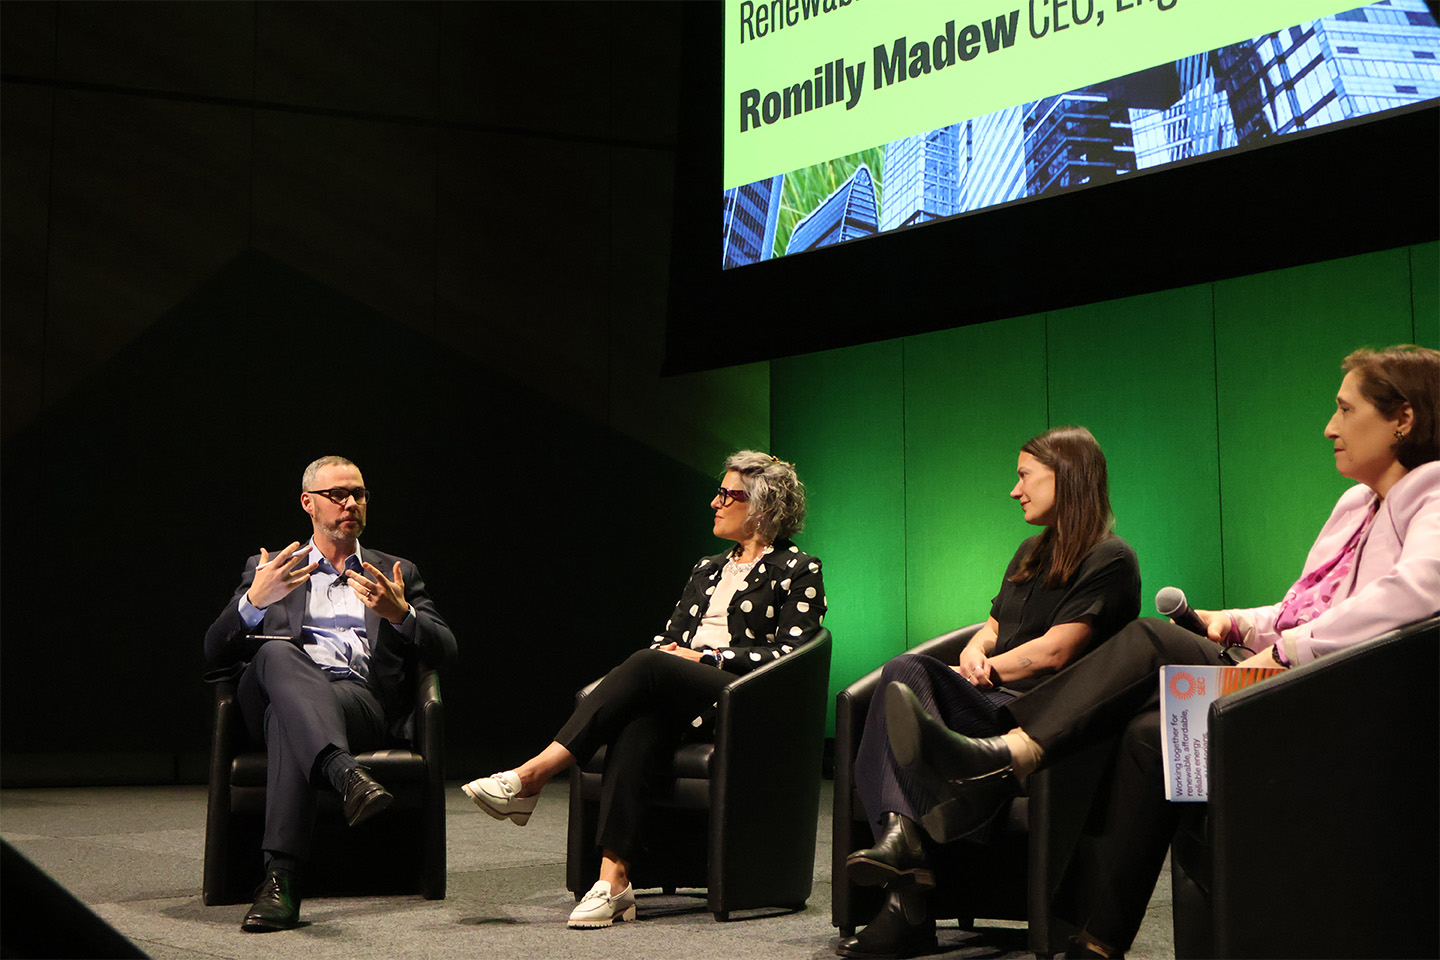 Romilly Madew sitting on a chair, on a stage, alongside two other women and a man